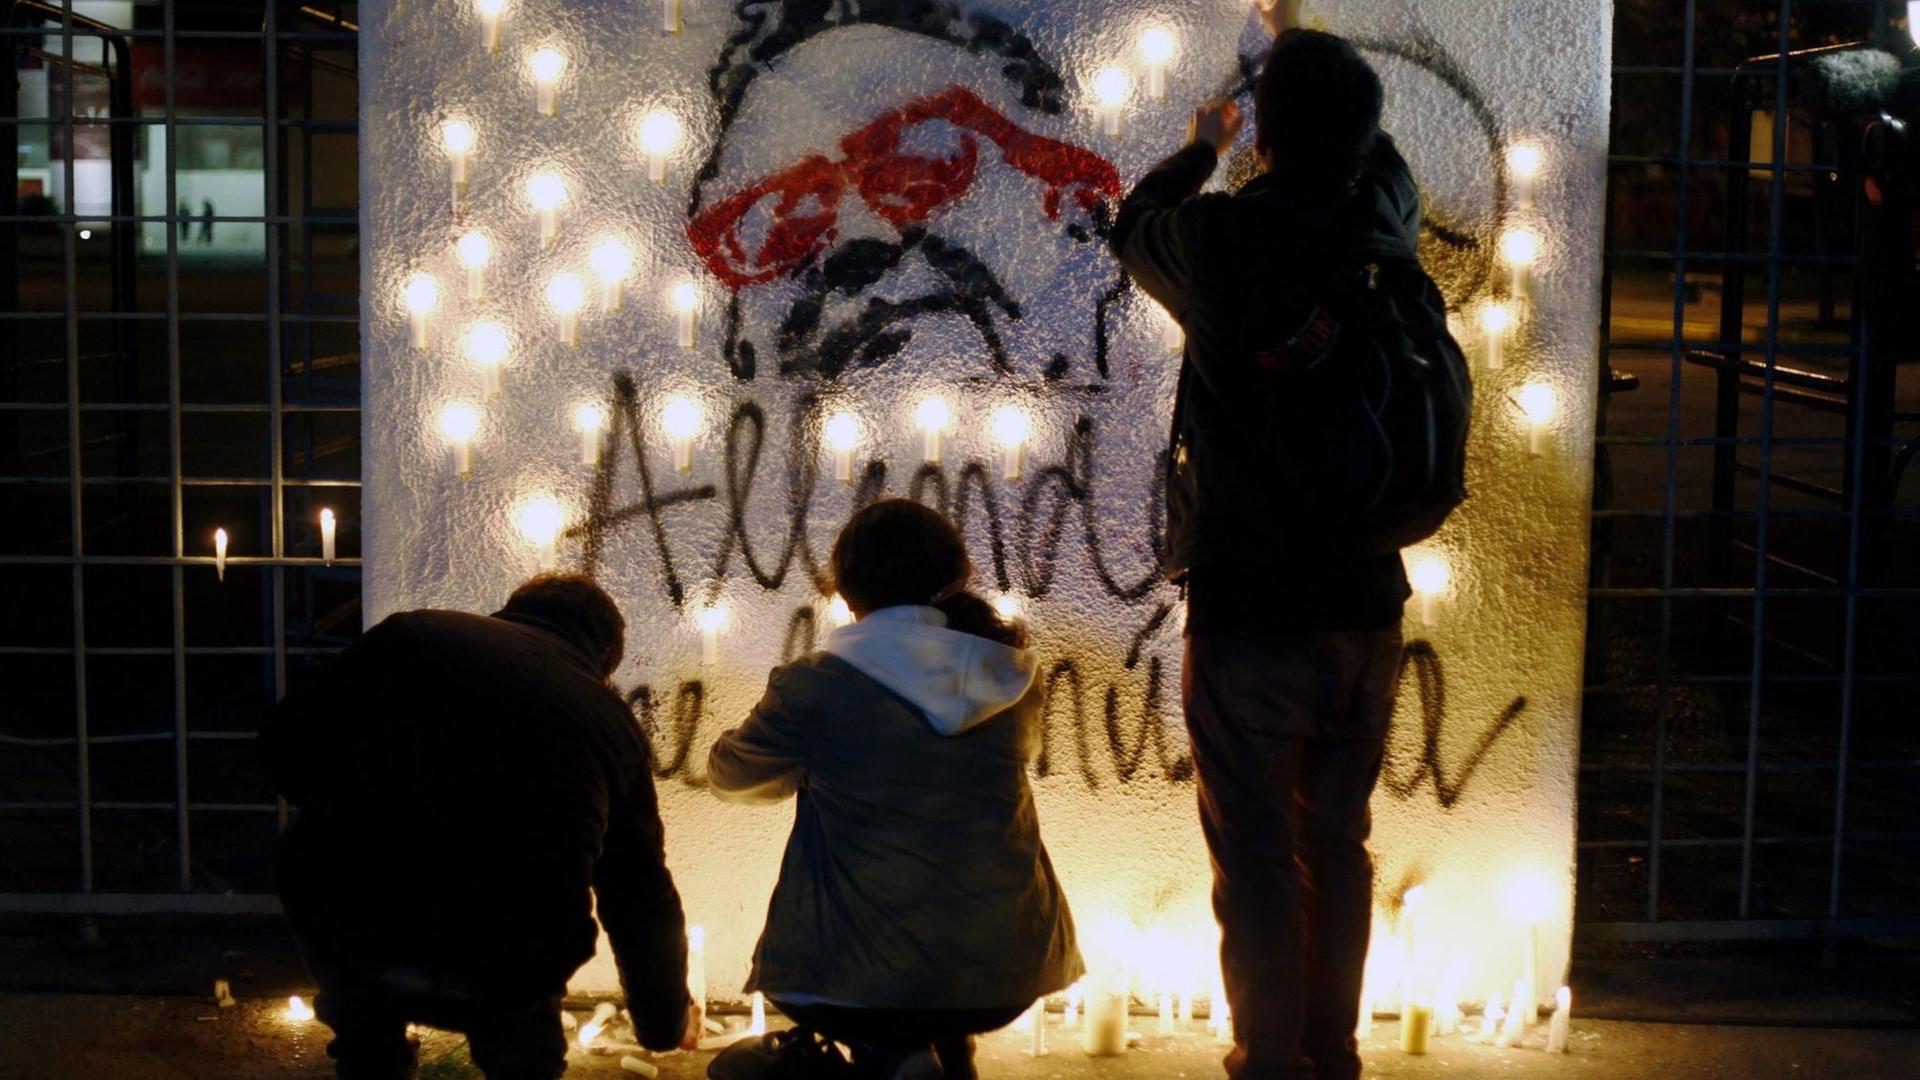 A group of people light candles at Estadio Nacional in Santiago, Chile, 11 September 2014. Chileans commemorated the 41st anniversary of the military coup d'etat by General Augusto Pinochet against the back then President Salvador Allende.